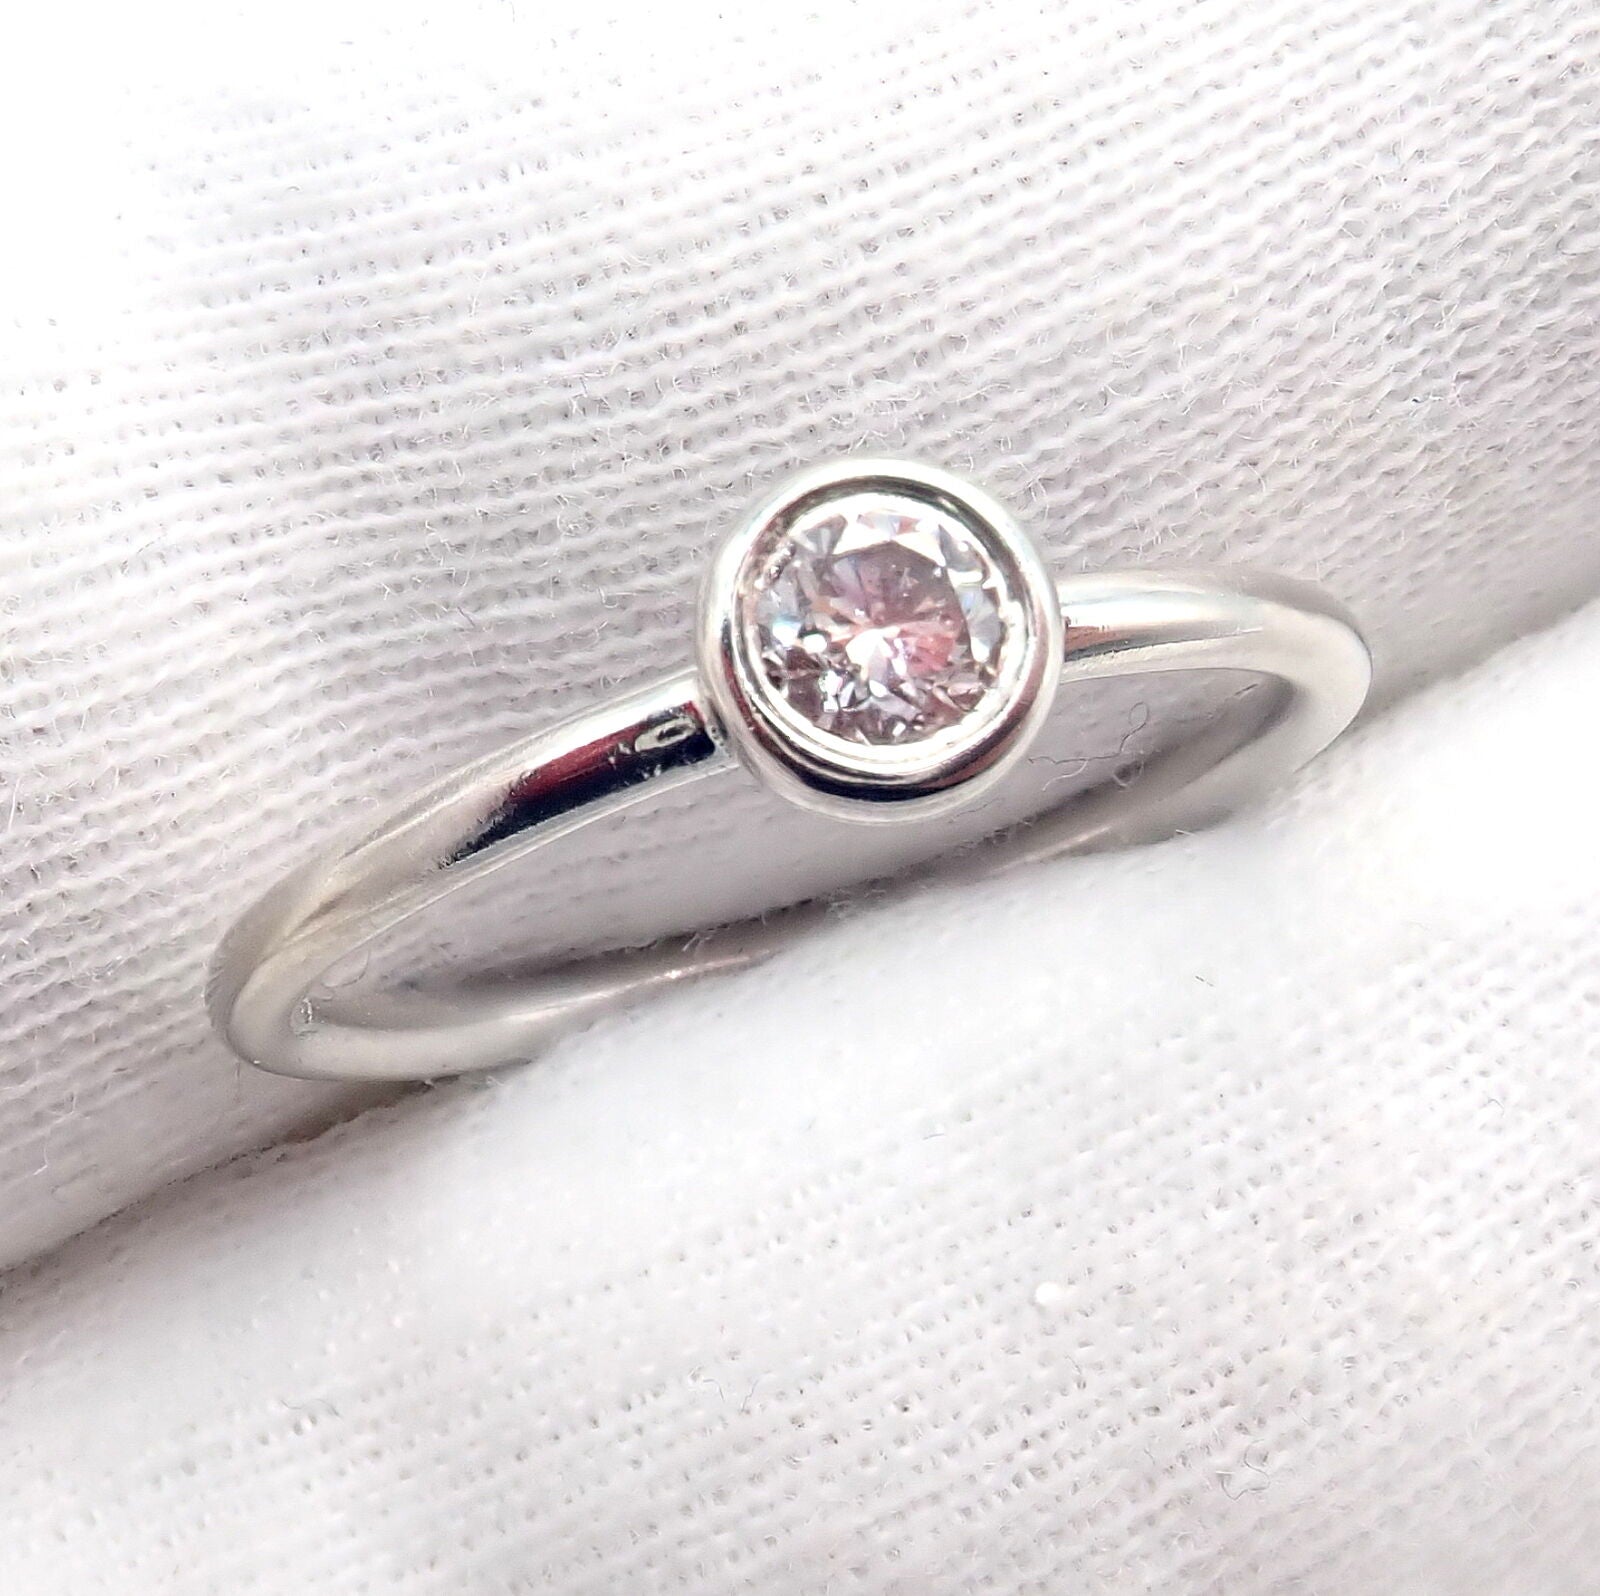 Tiffany & Co. Jewelry & Watches:Vintage & Antique Jewelry:Rings Tiffany & Co Platinum 0.12ct Diamond Engagement Stacking Ring sz 5.75